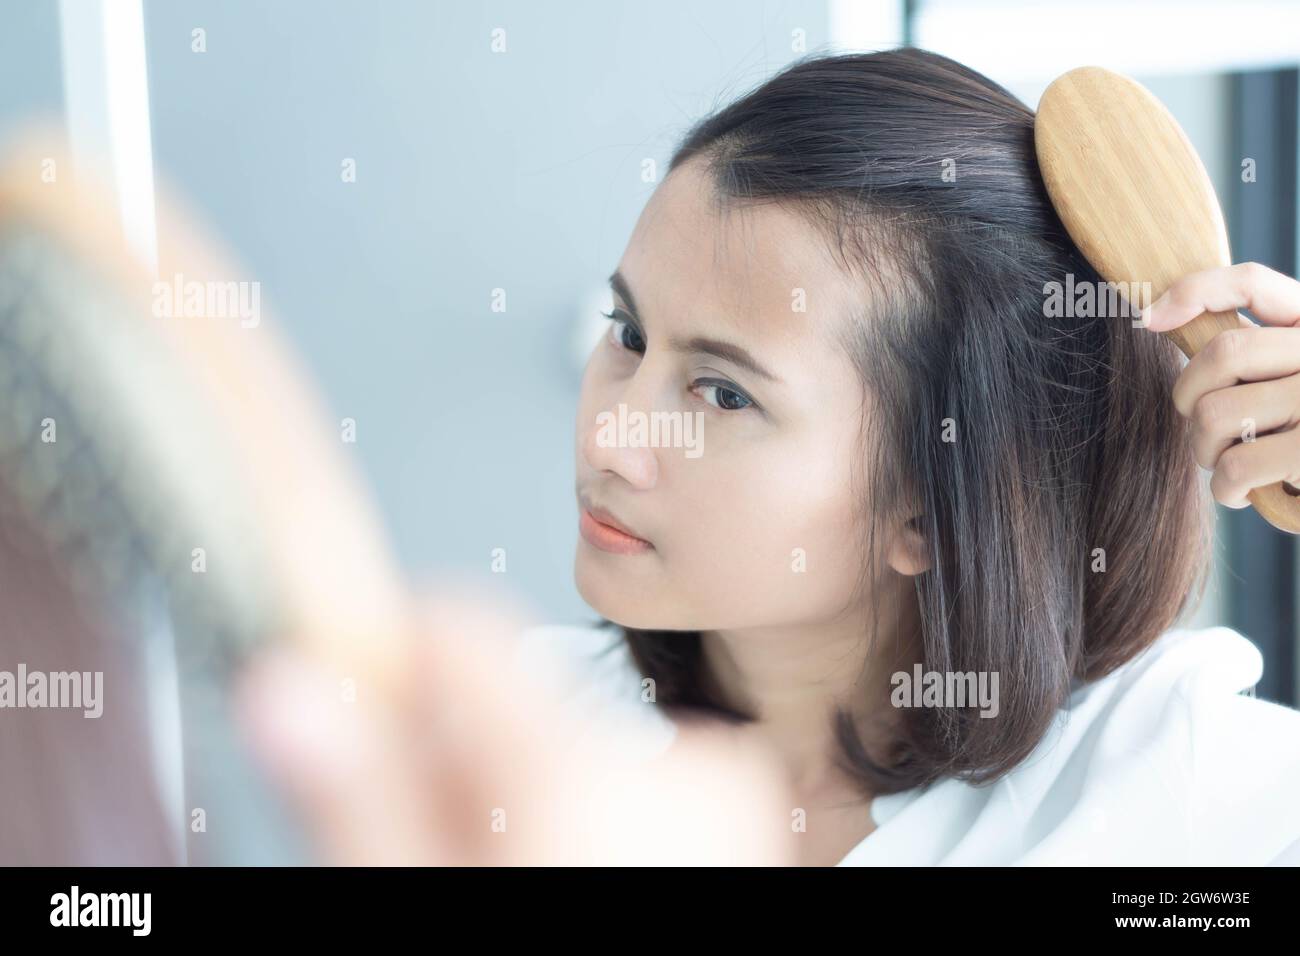 Reflection Of Woman Combing Hair On Mirror Stock Photo